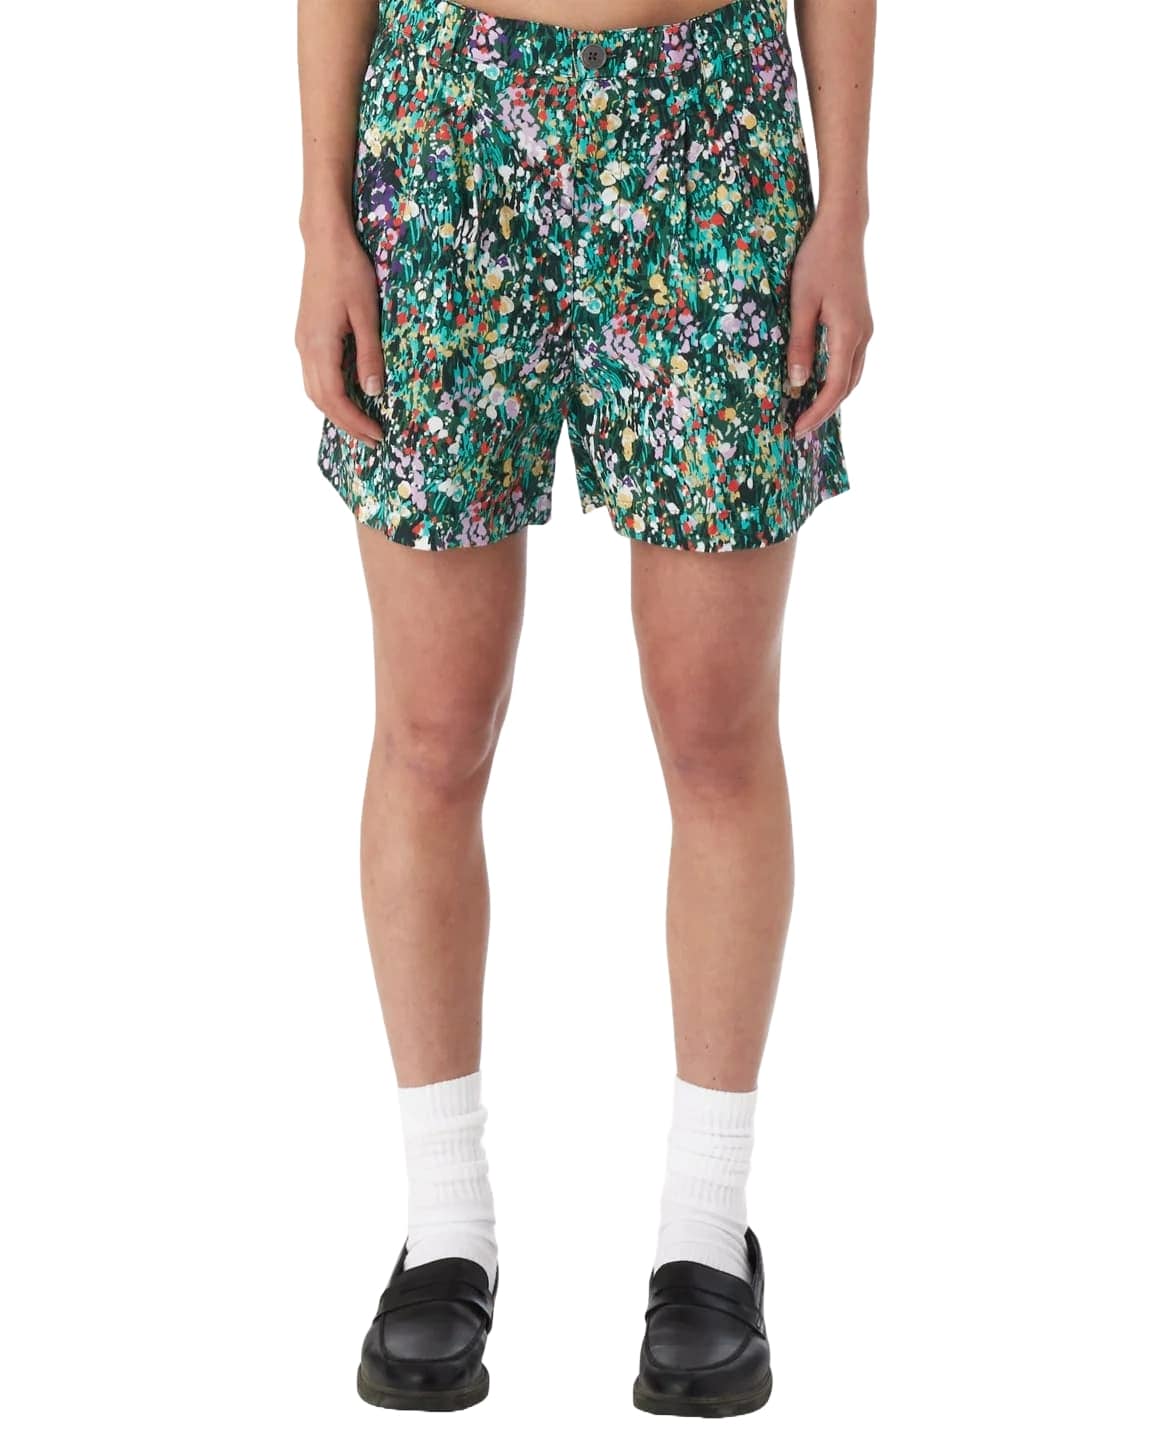 Obey Women's Spring Garden Multicolored Shorts